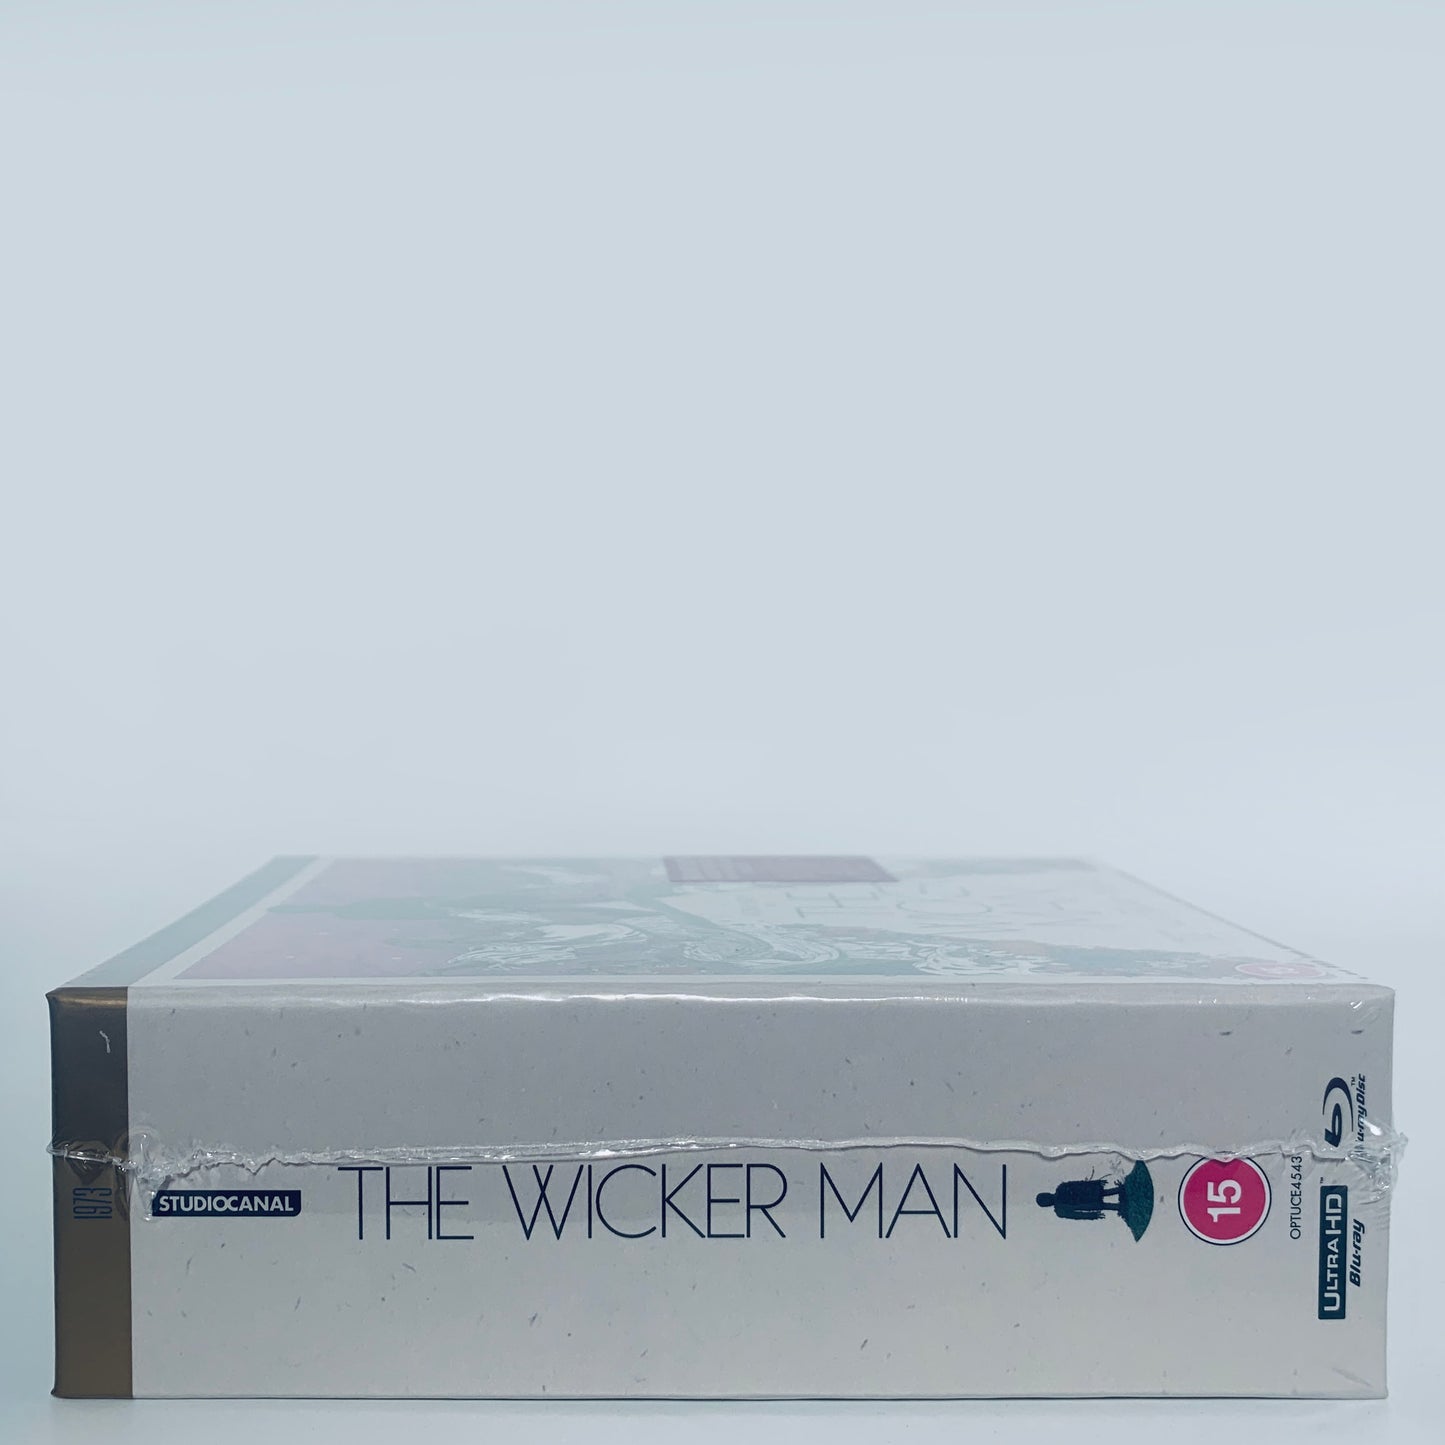 The Wicker Man Limited Edition Christopher Lee 5-Disc 4K Ultra HD Blu-ray Studio Canal UK